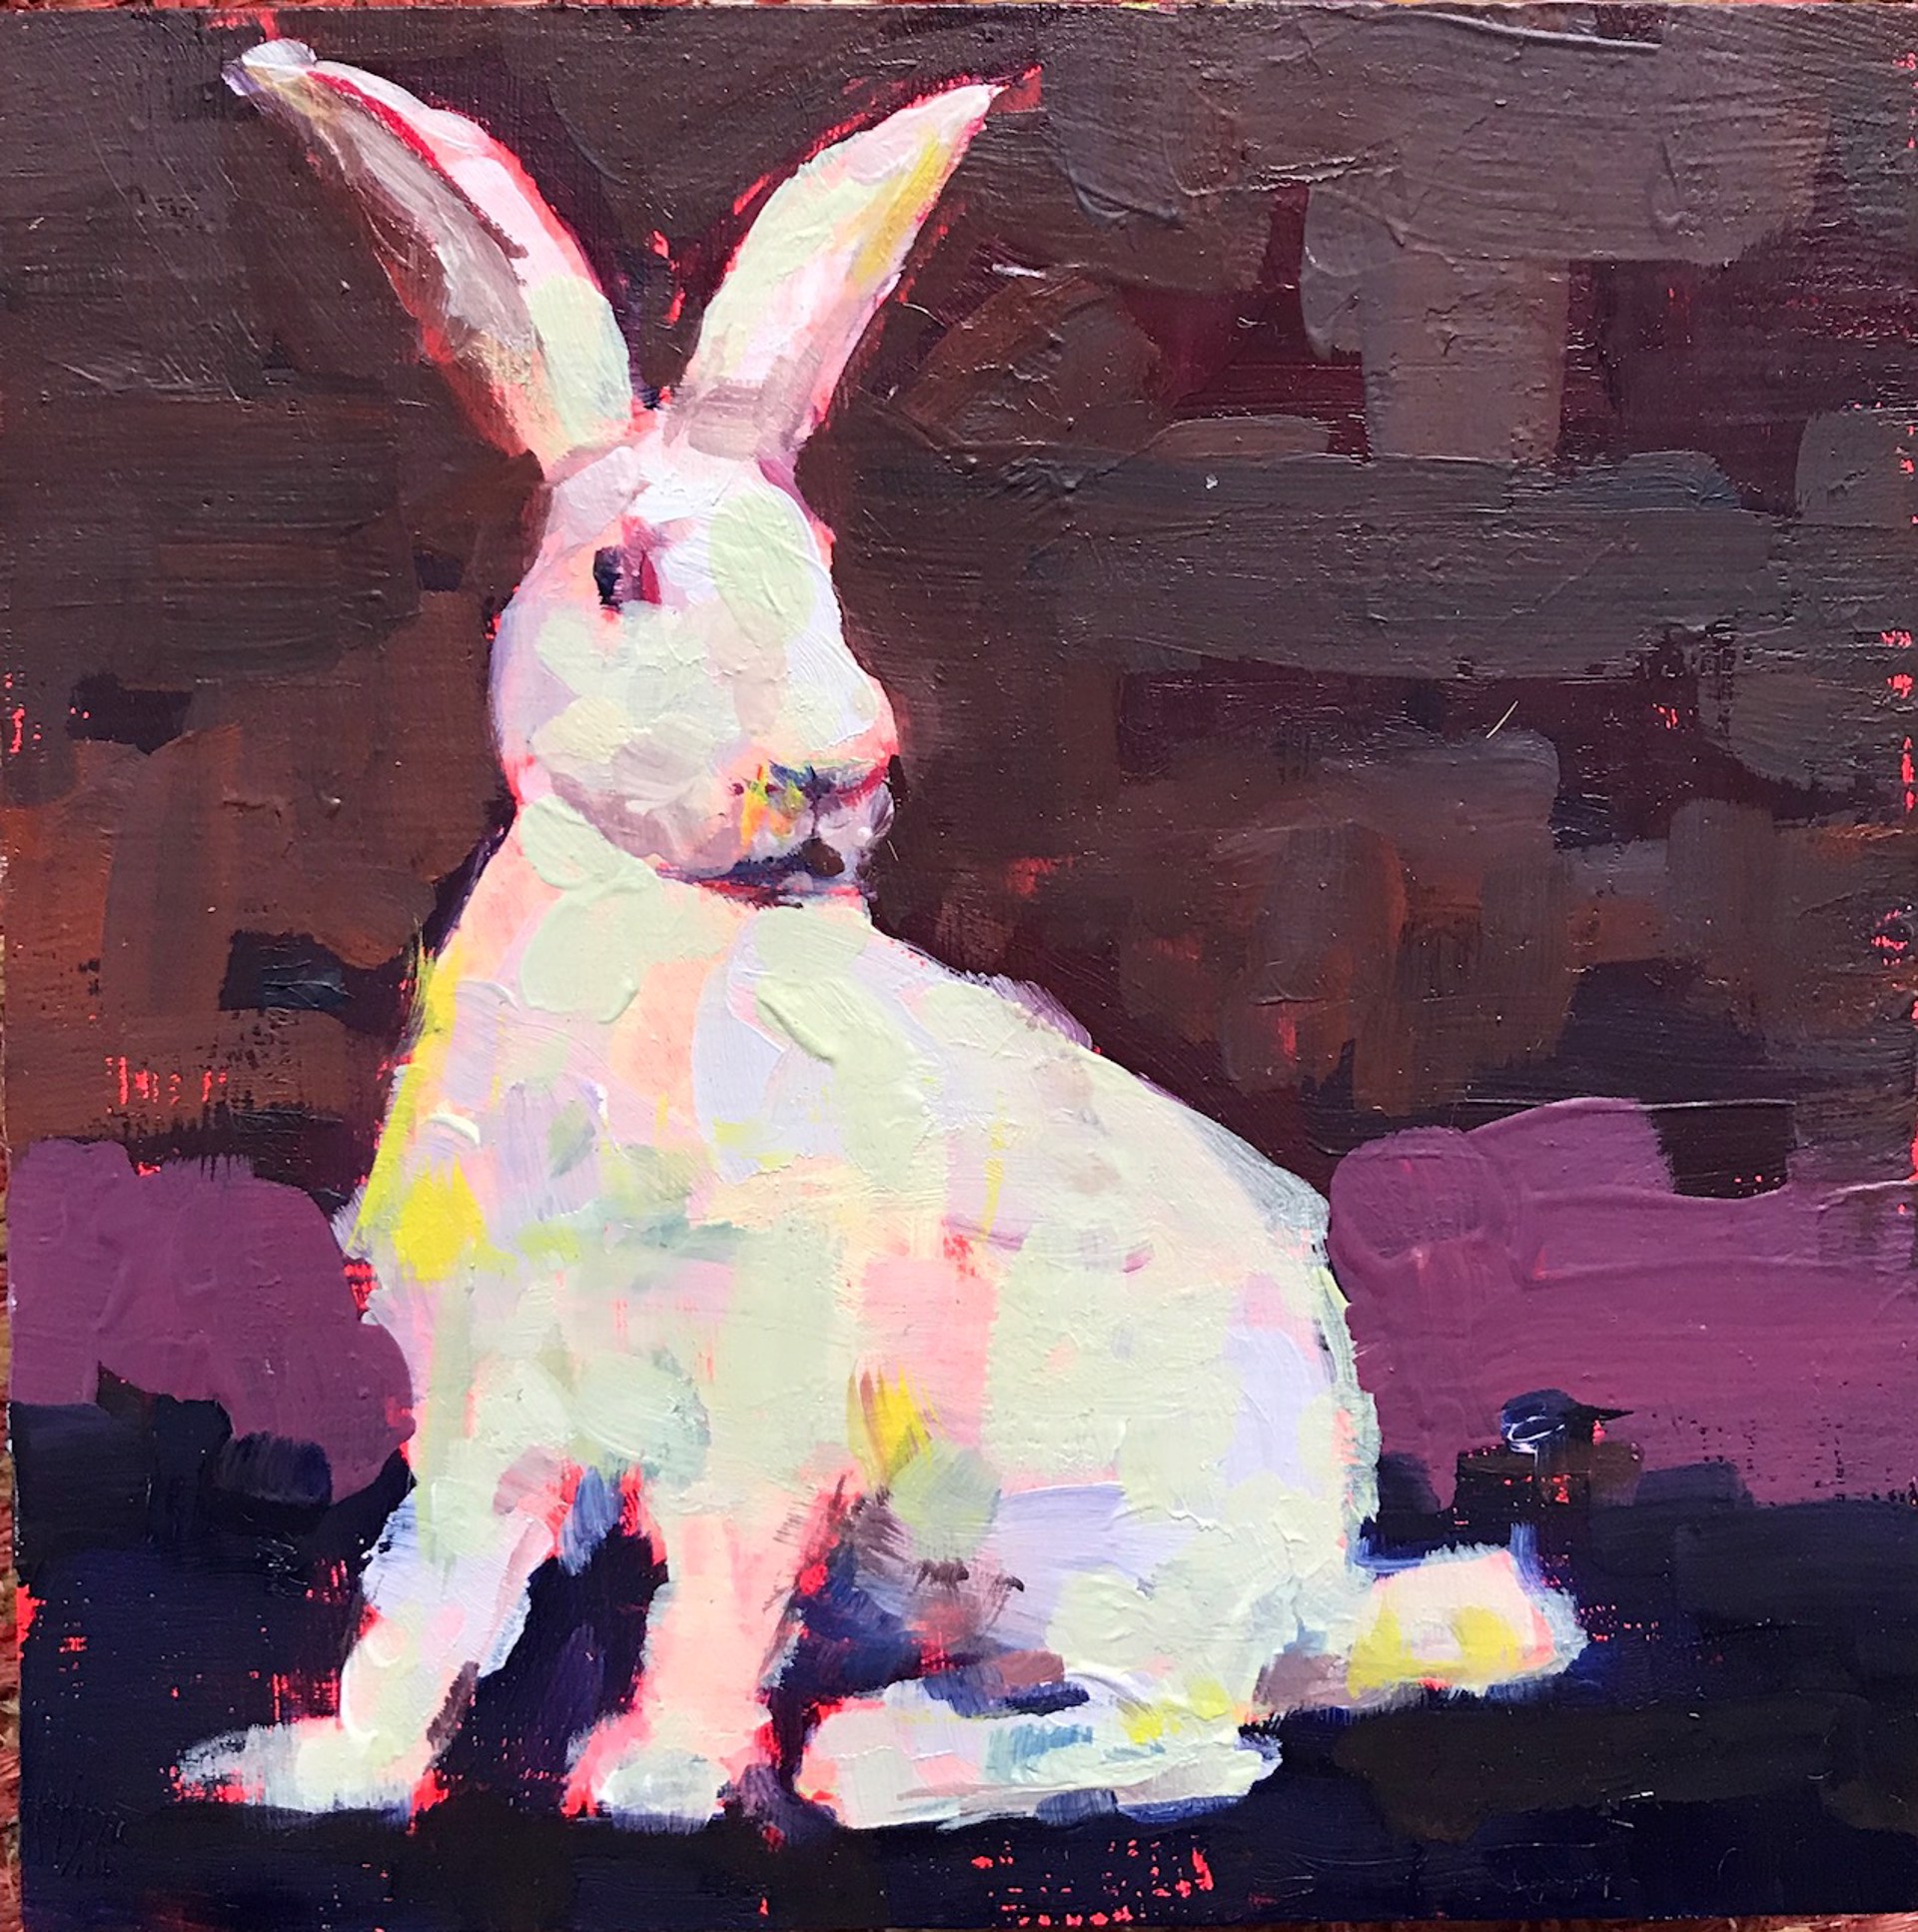 Brian Stephens - All the Wild Ones Act 5 Oil on panel 5 x 5 in $550.00